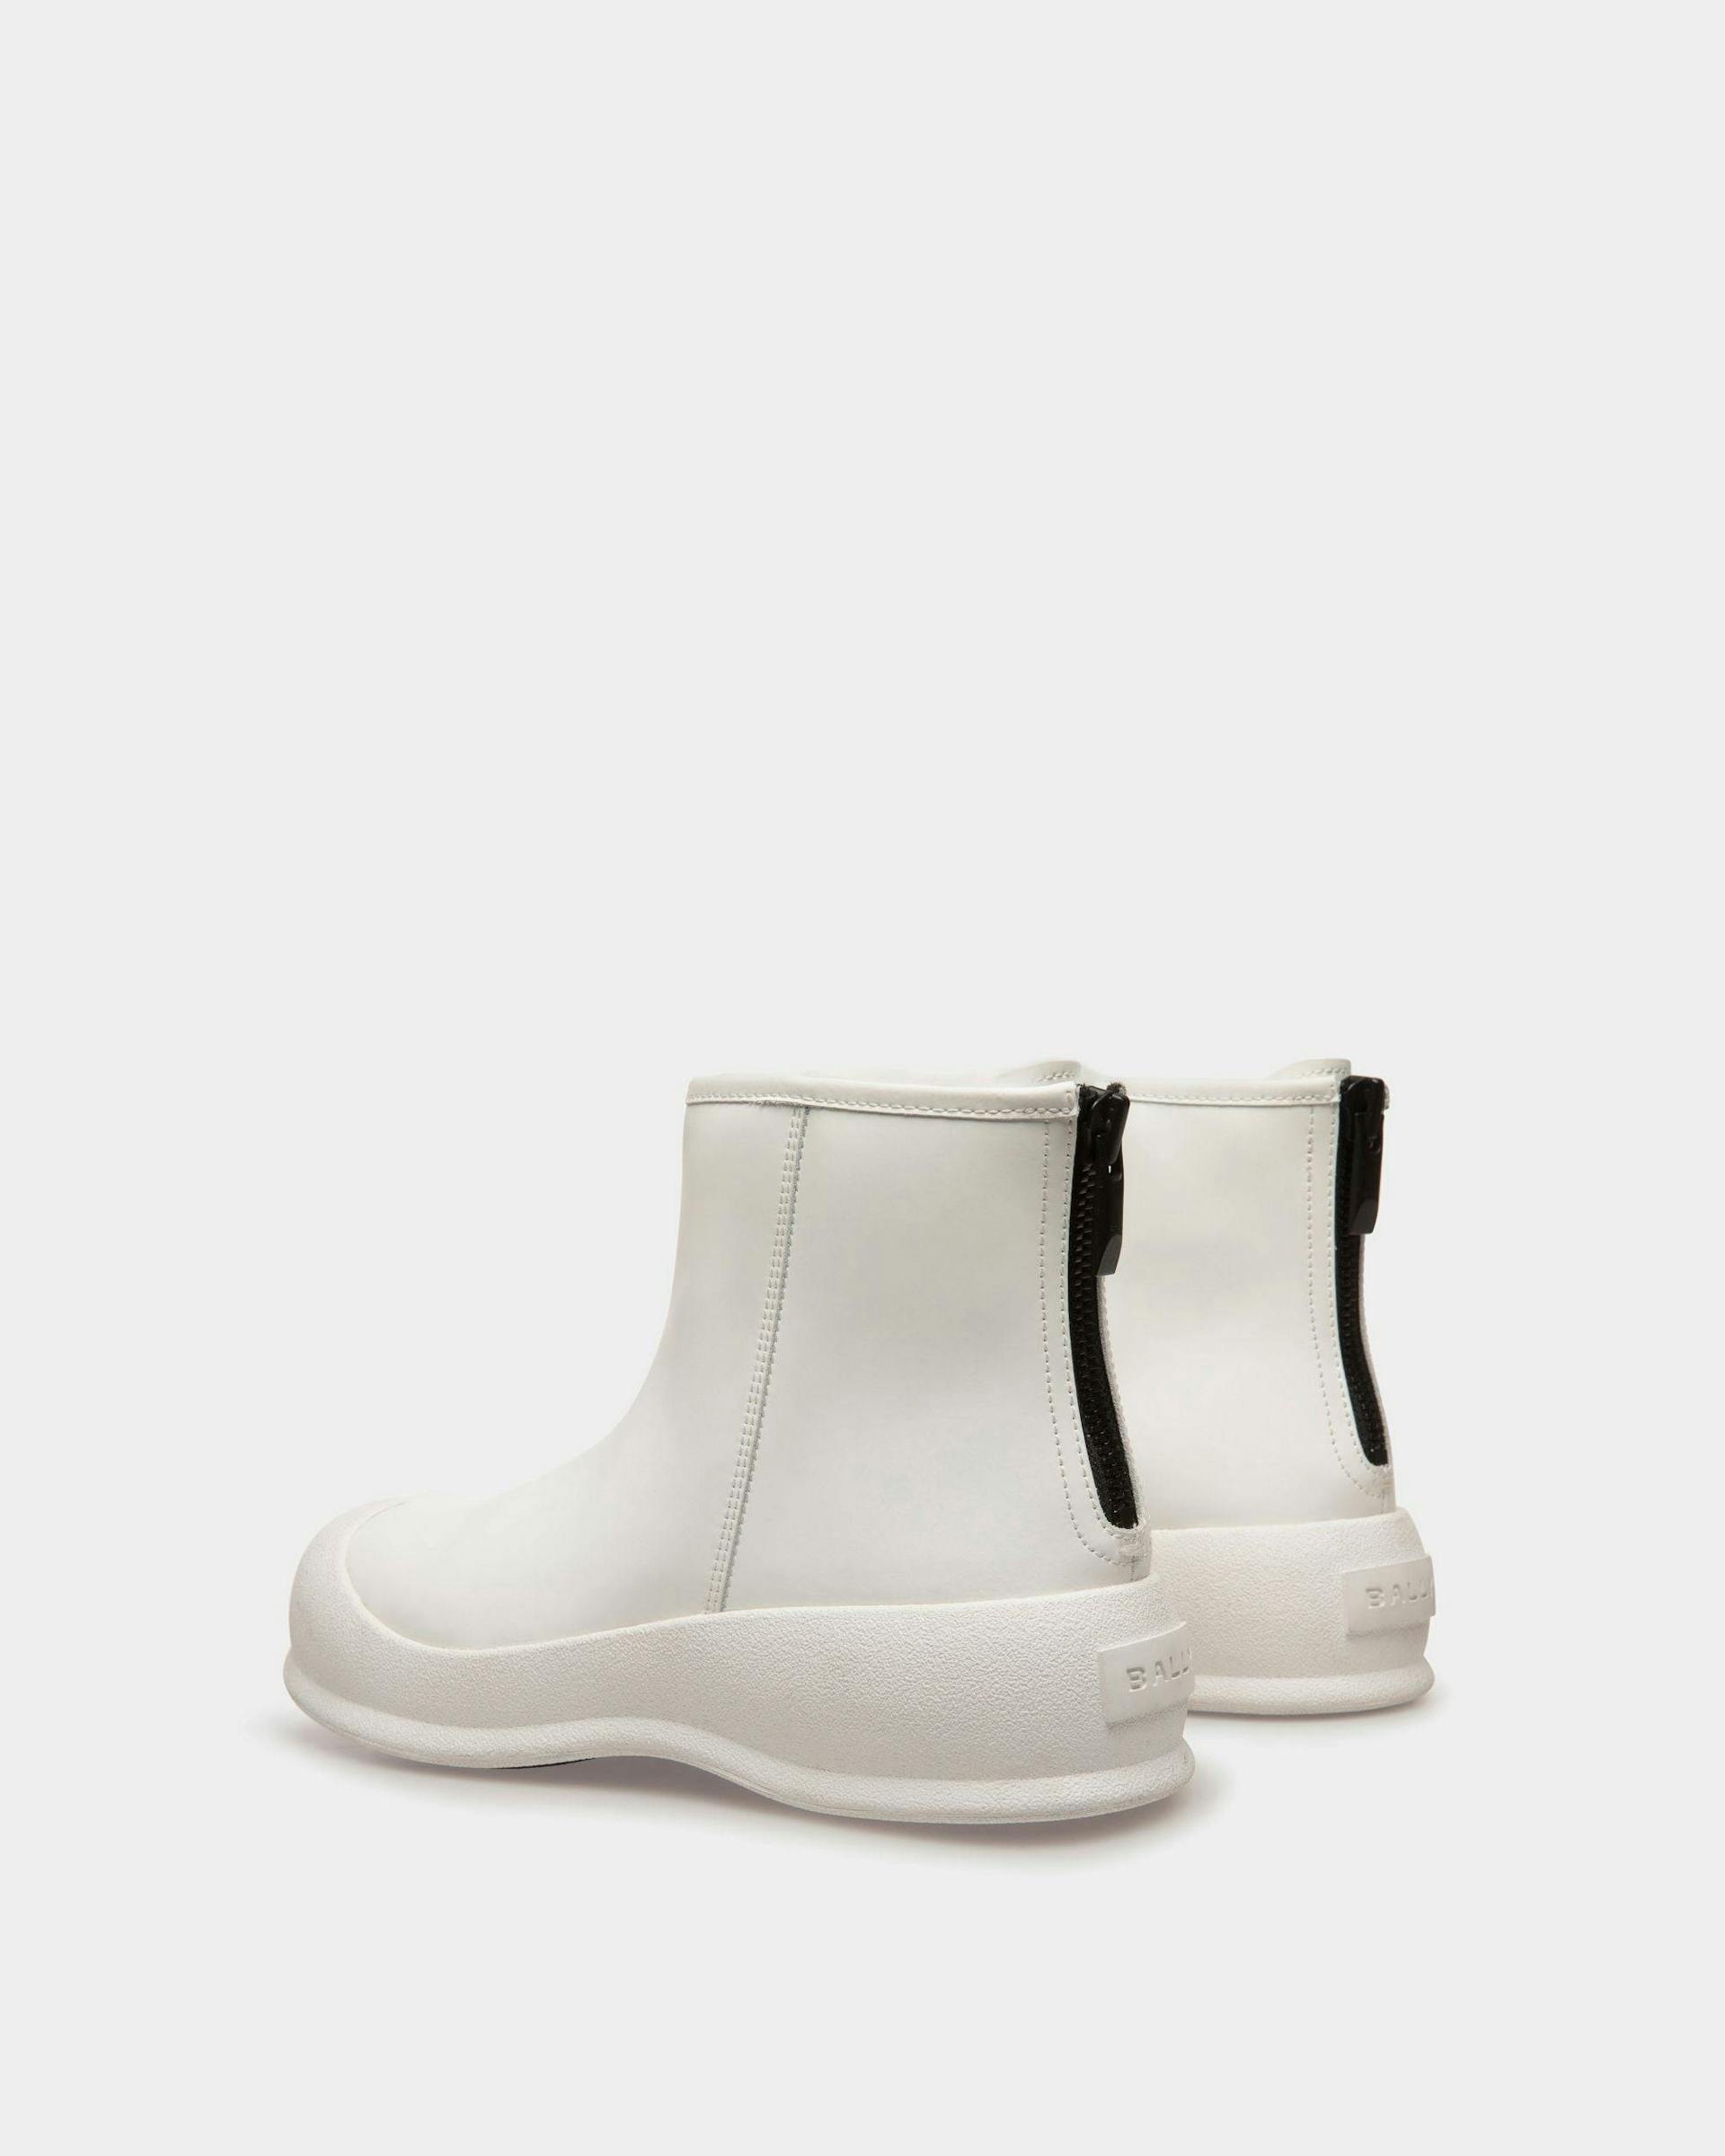 Women's Frei Boots In White Rubber-coated Leather | Bally | Still Life 3/4 Back